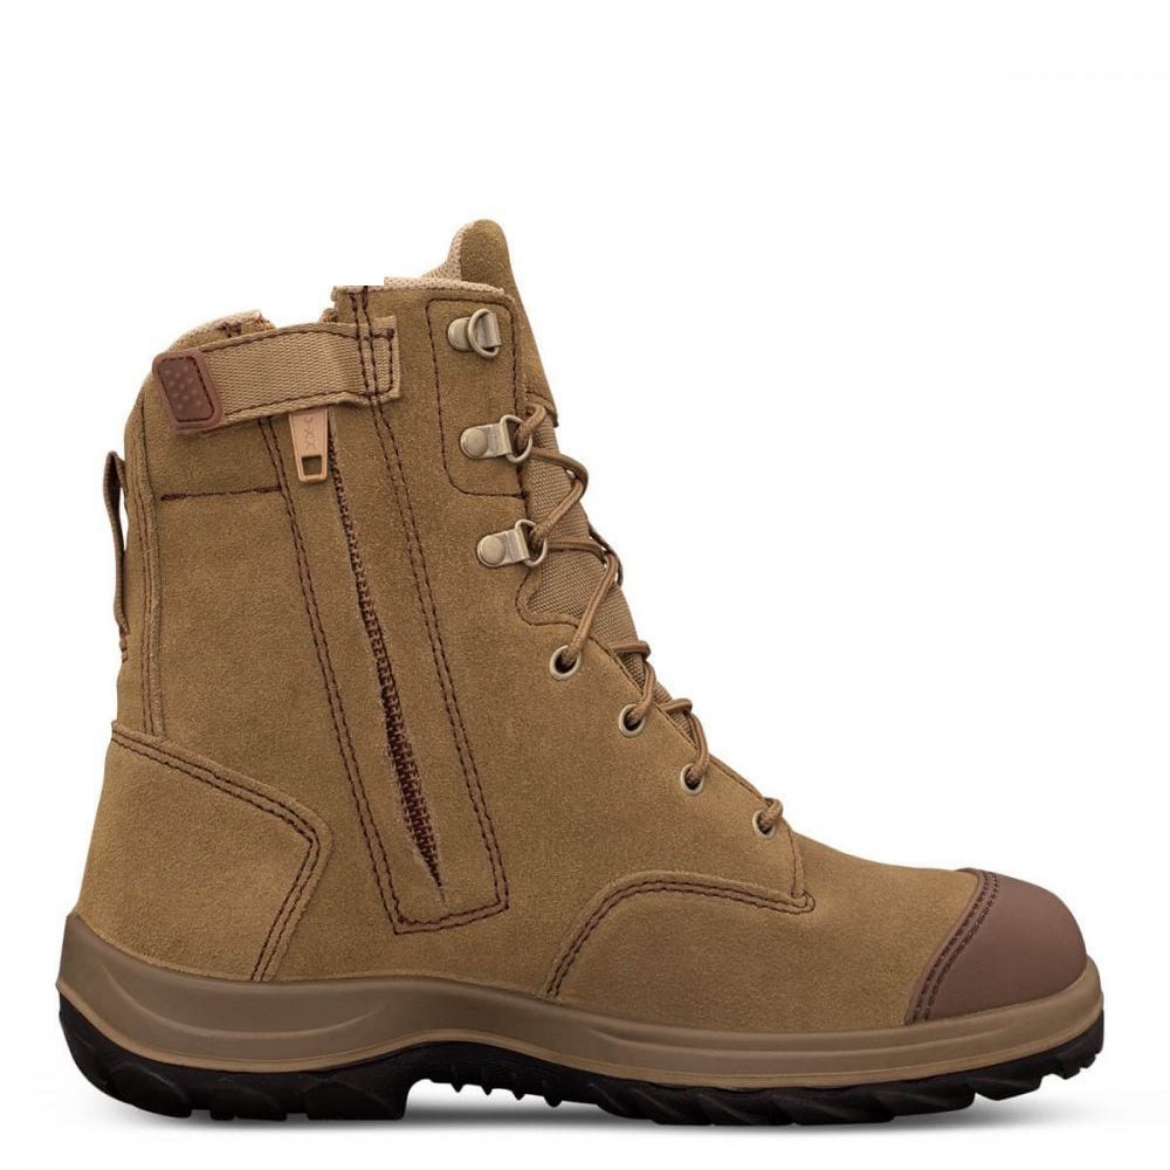 Picture of Oliver, 190mm Hi Leg Zip Safety Boot, Penetration Protection